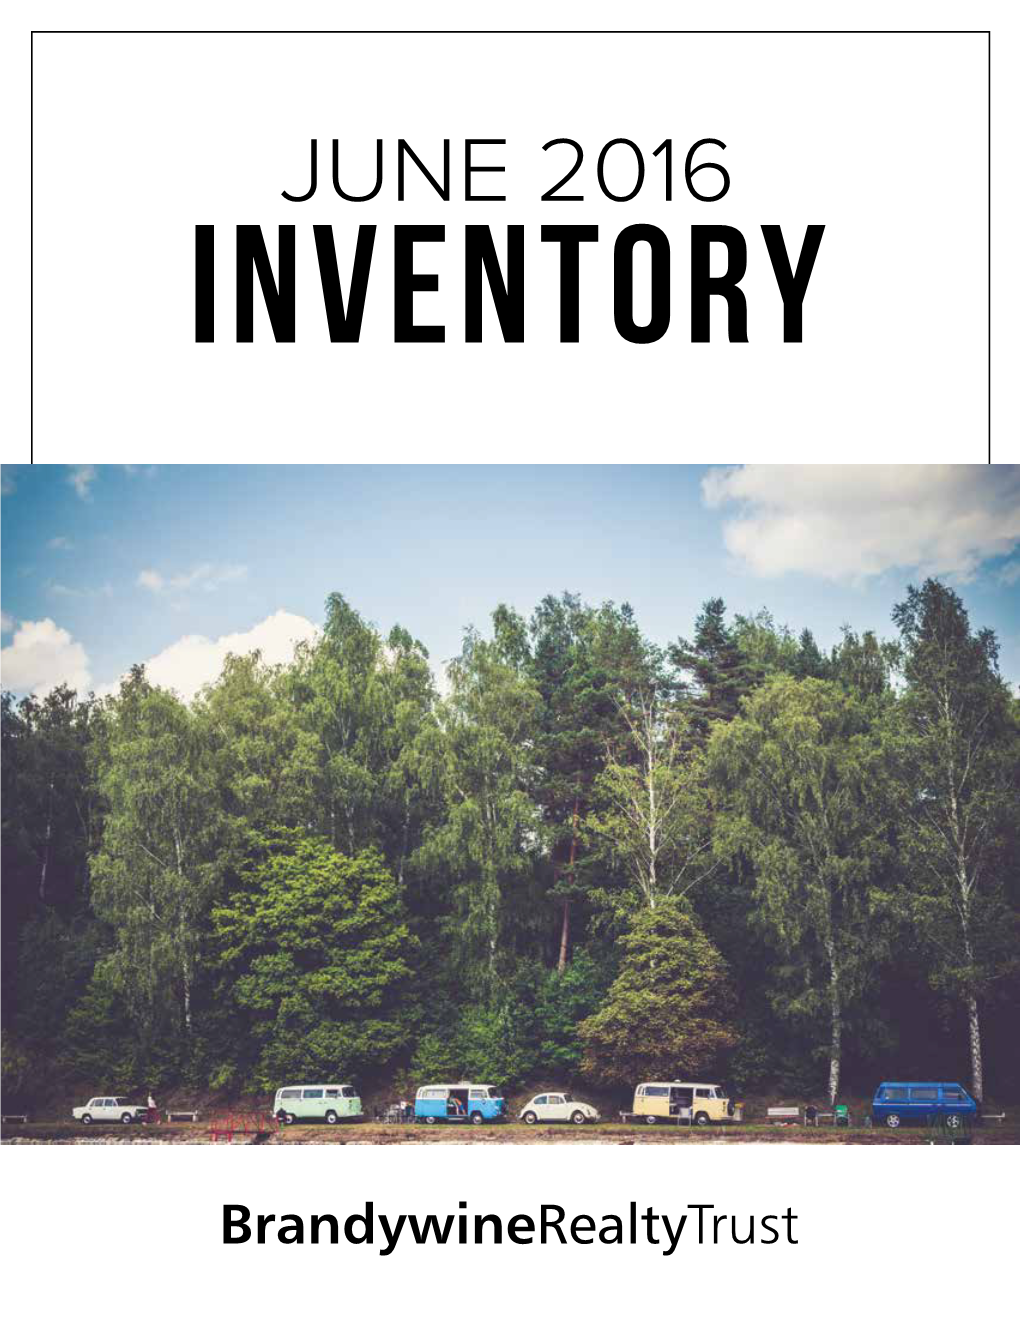 June 2016 Inventory June 2016 Office Inventory